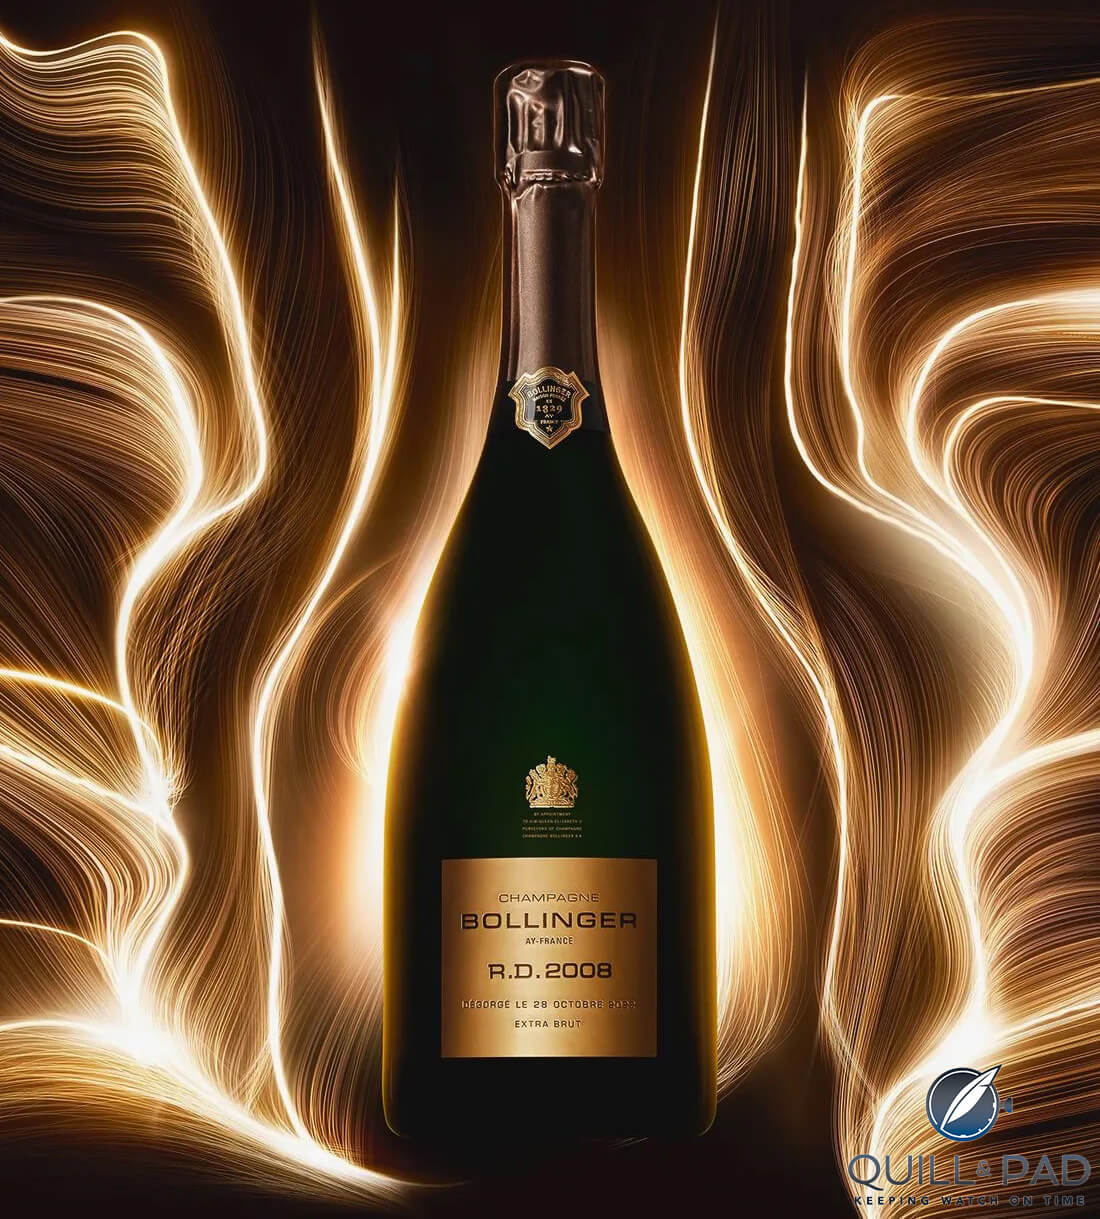 Bollinger RD 2008 Champagne: One of the Greatest Wines from a